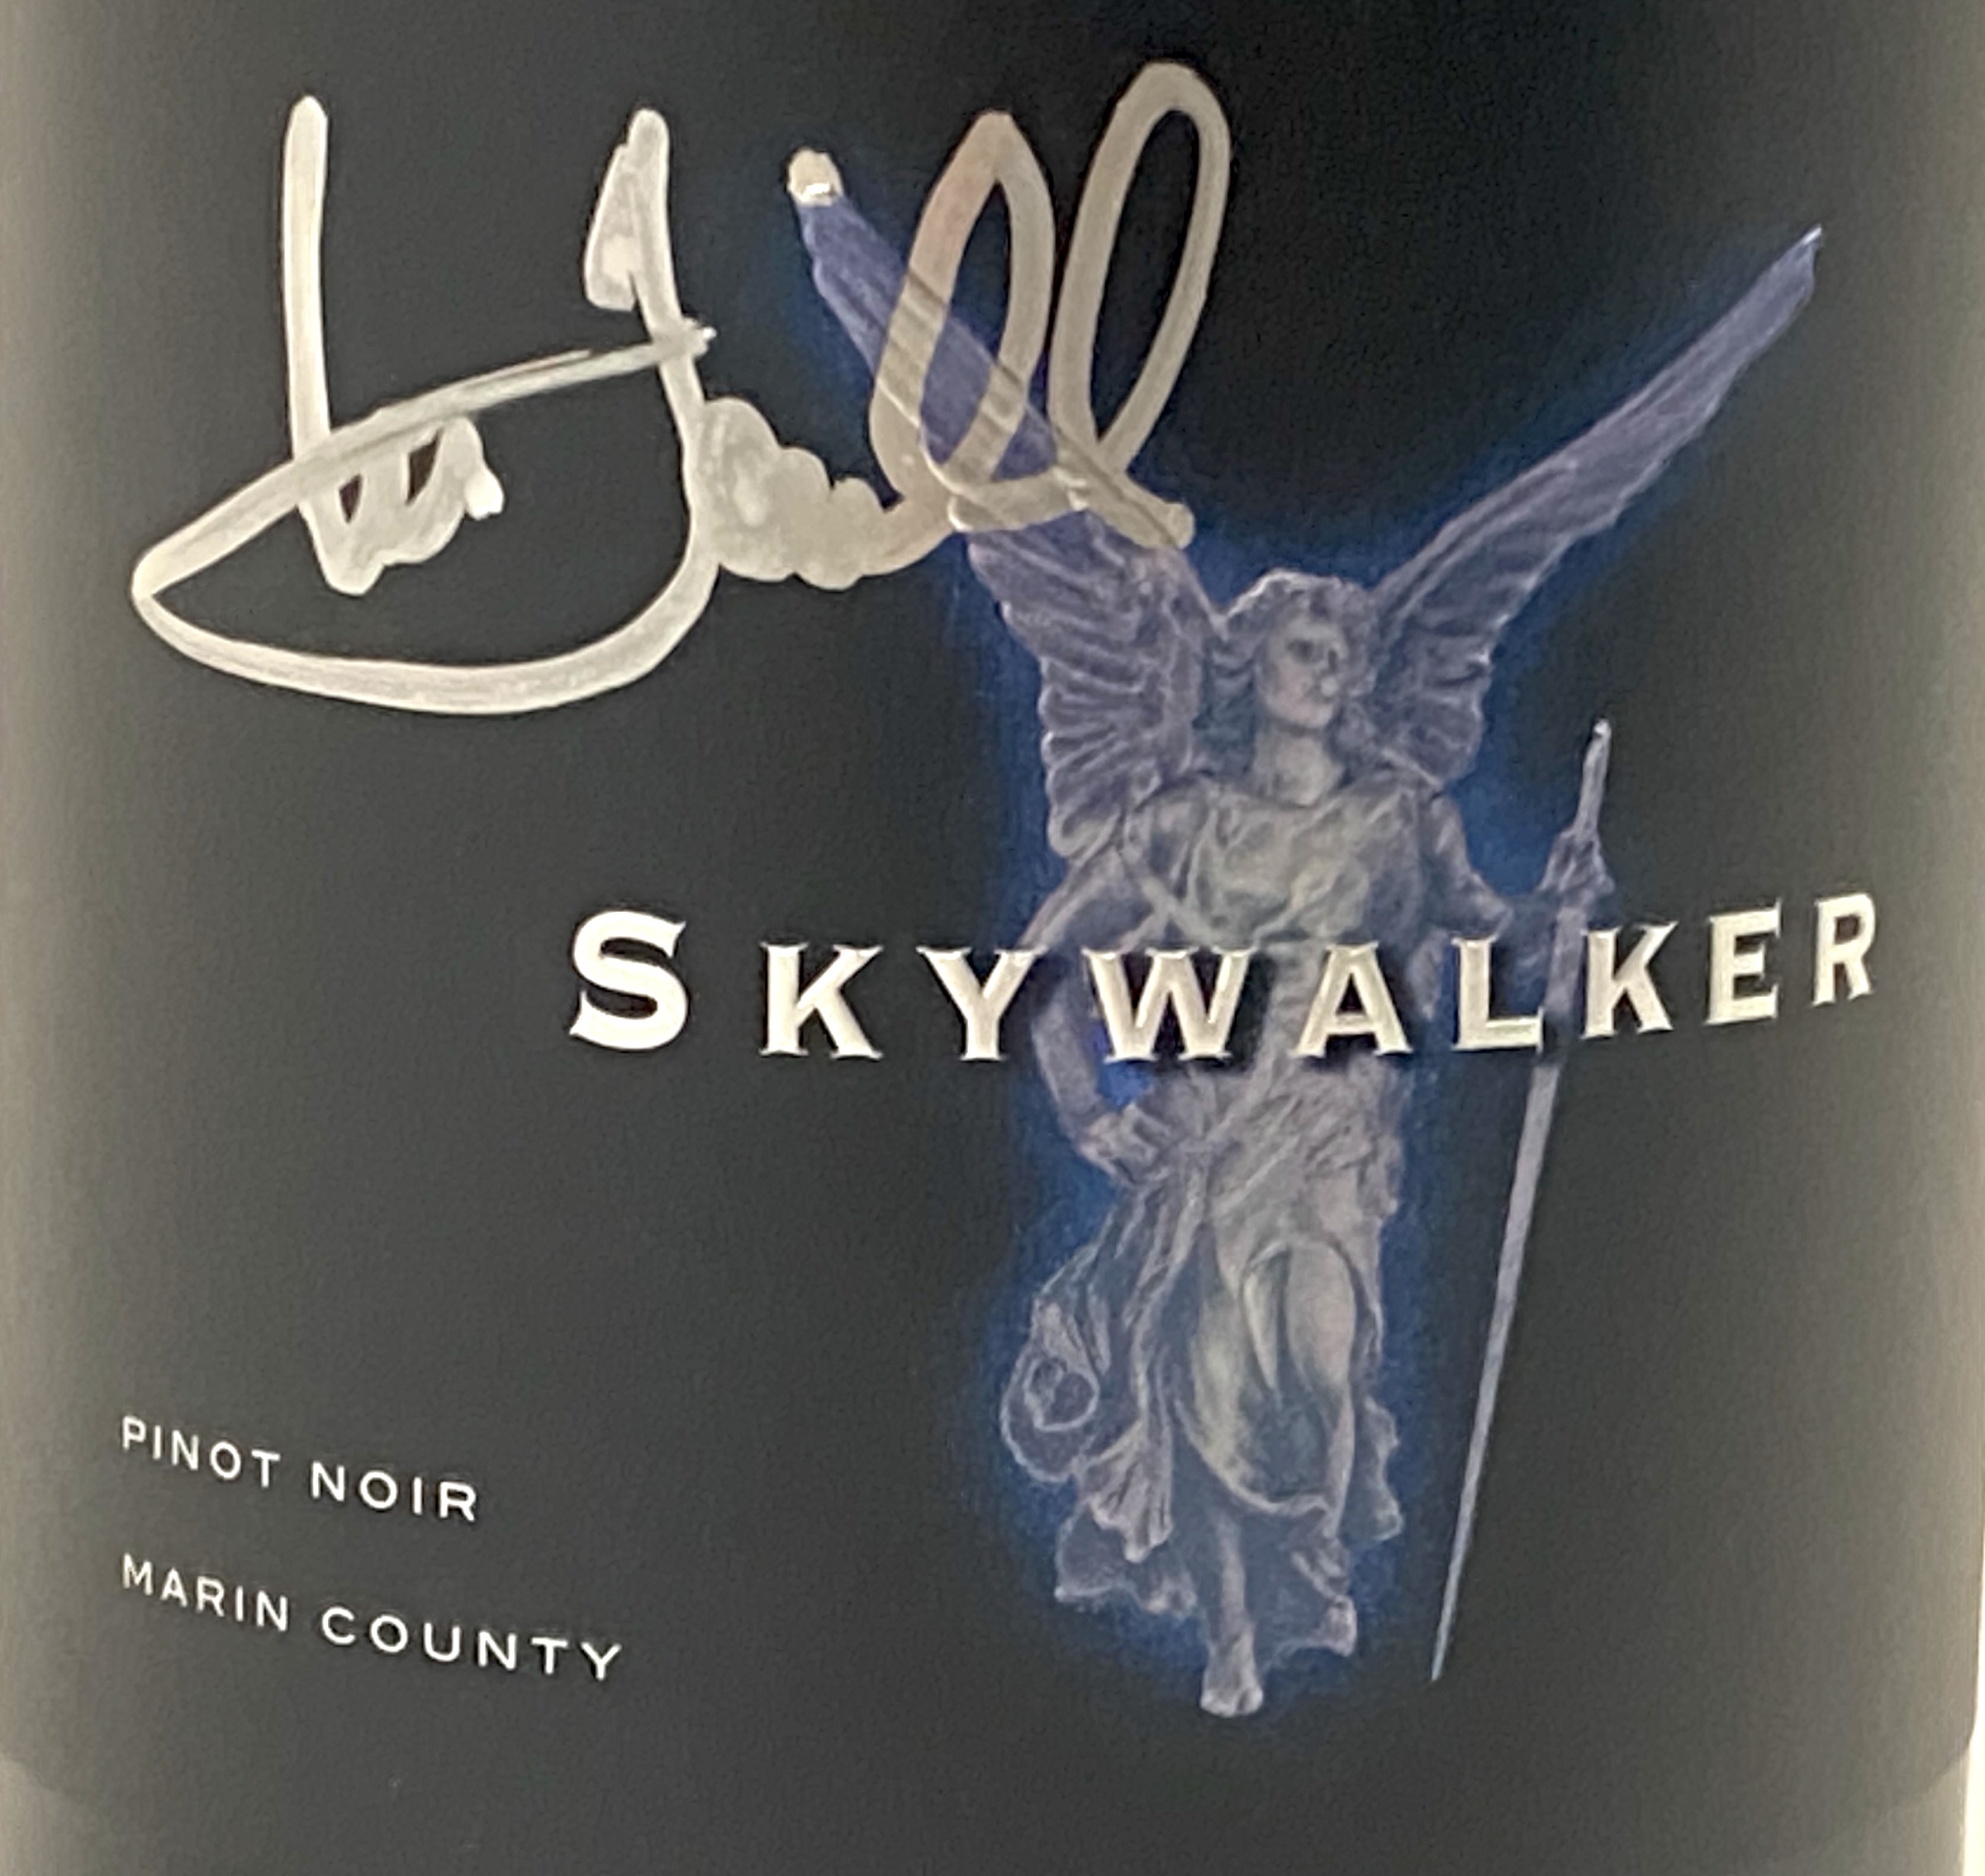 Skywalker Vineyards, Wine Now at the Star Wars Launch Bay